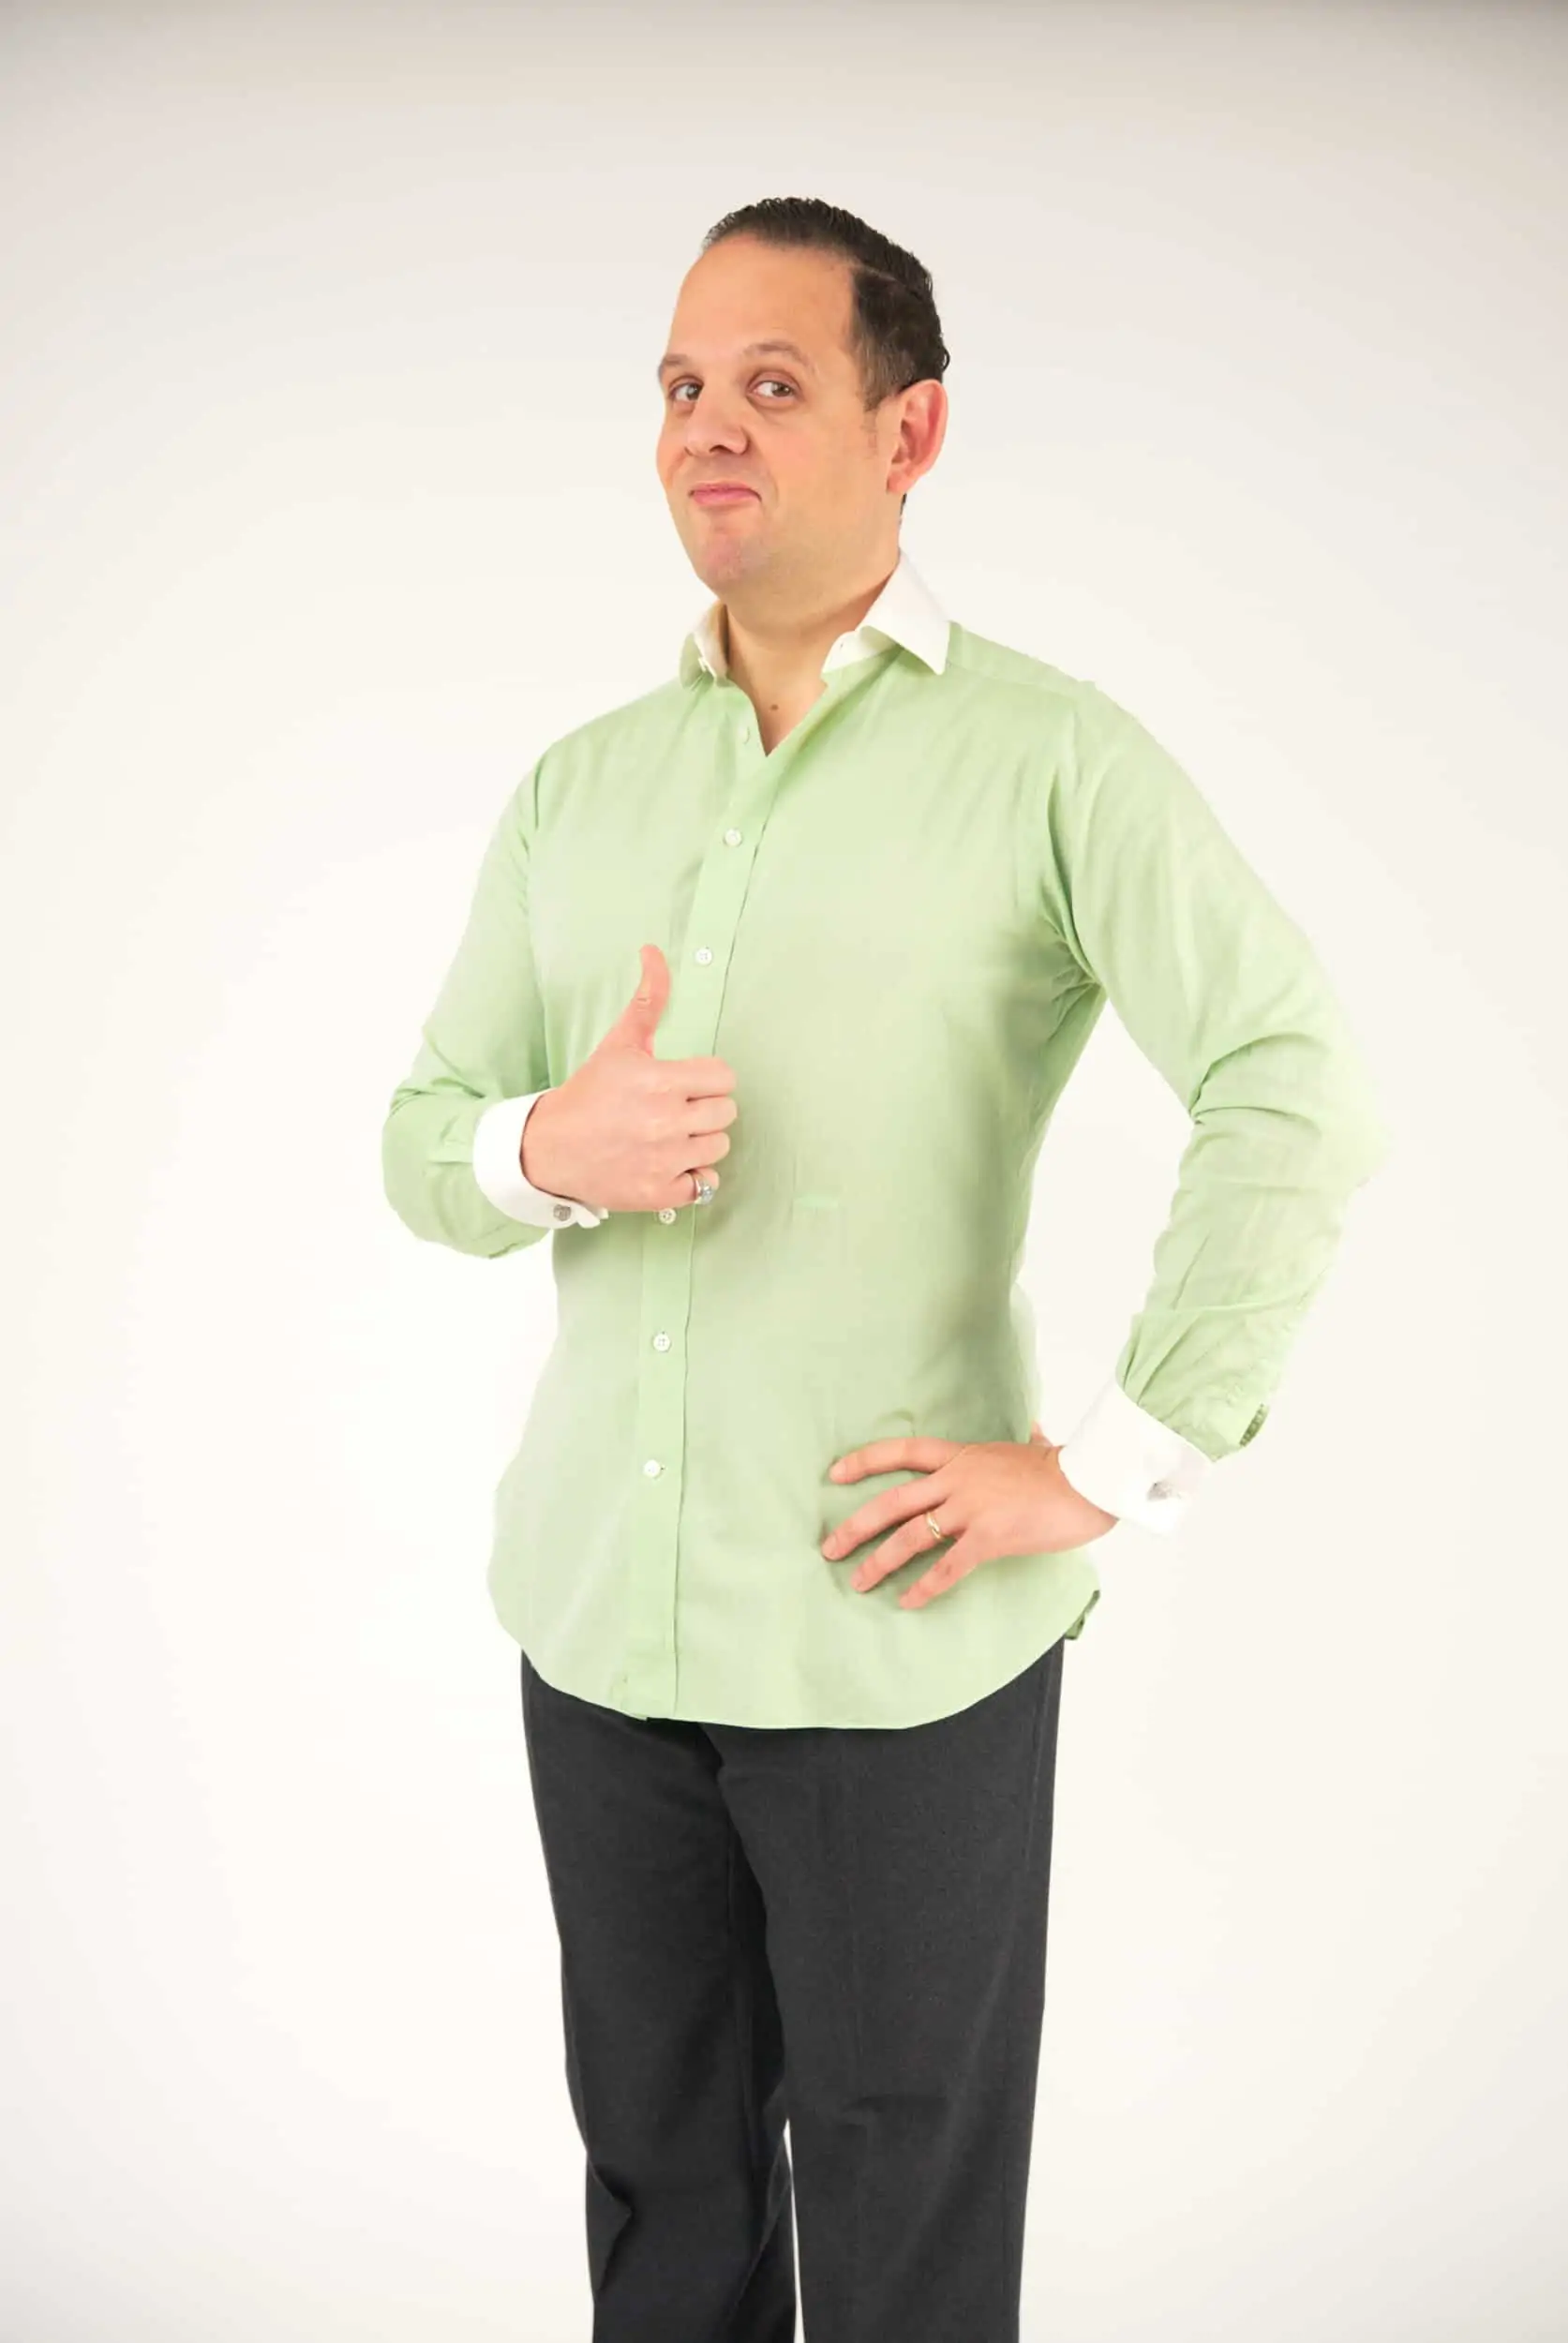 Raphael giving a thumbs up for his outfit; he's wearing a light green bespoke shirt With white French cuffs and spread collars.